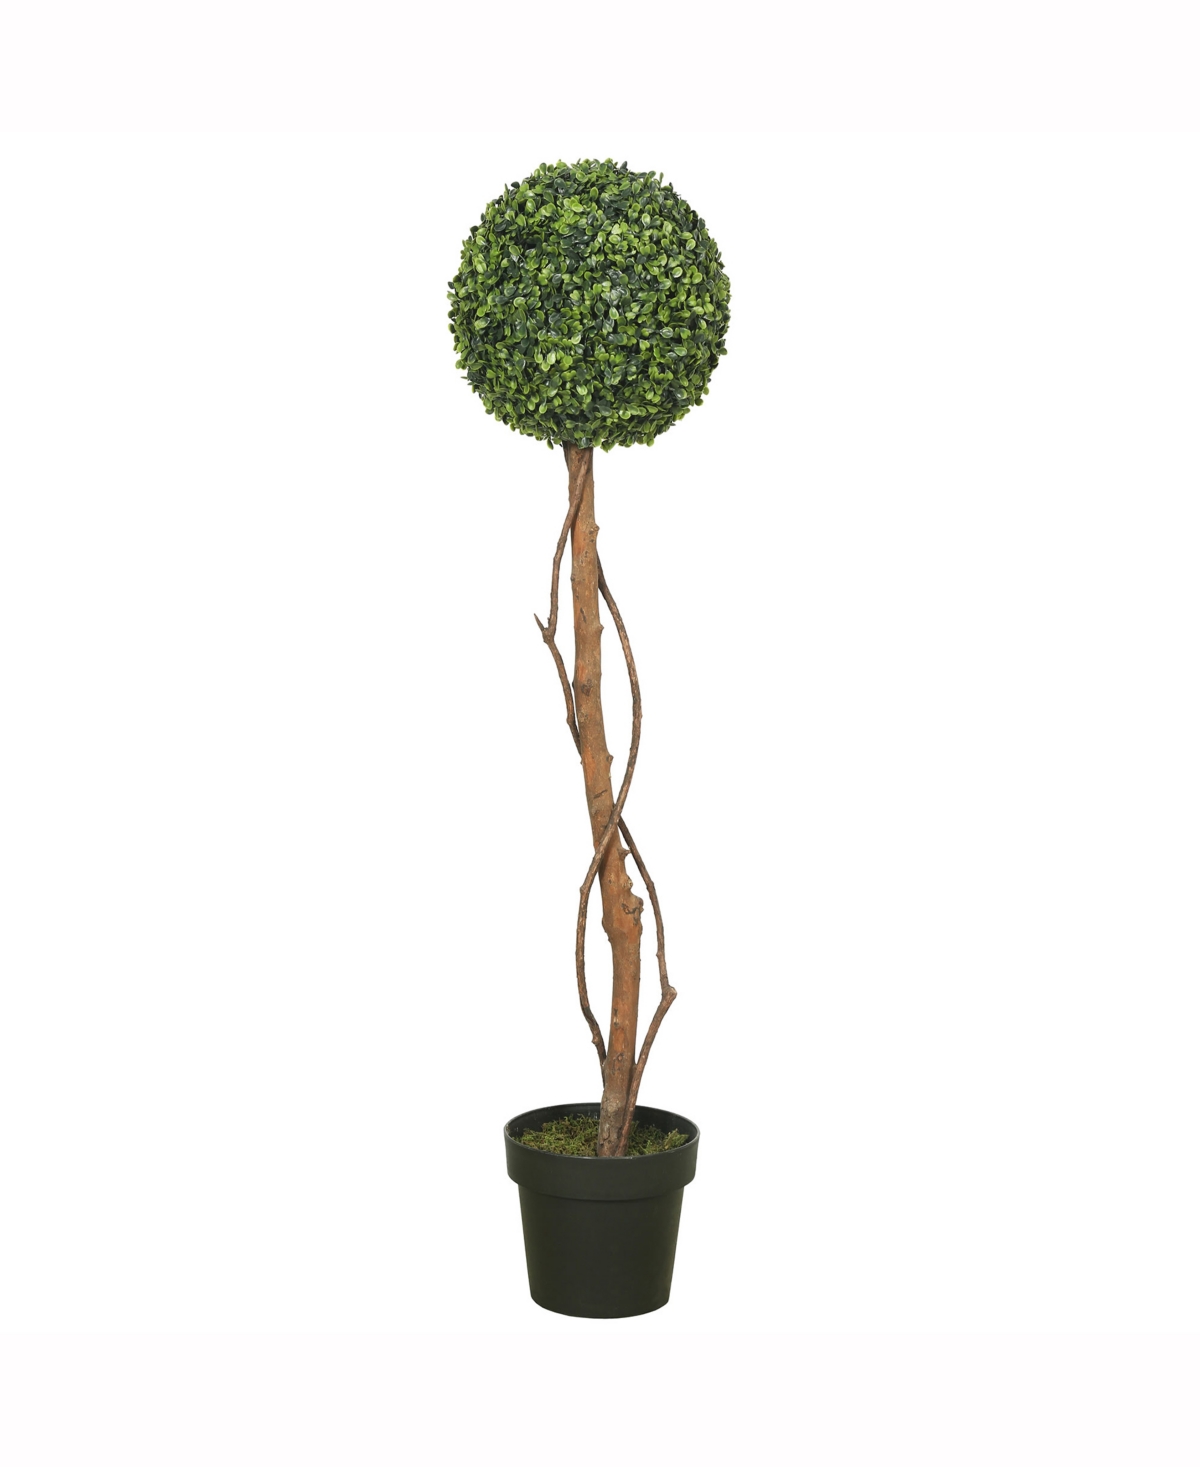 Vickerman 39" Artificial Green Boxwood Topiary Features An 11" Ball In No Color